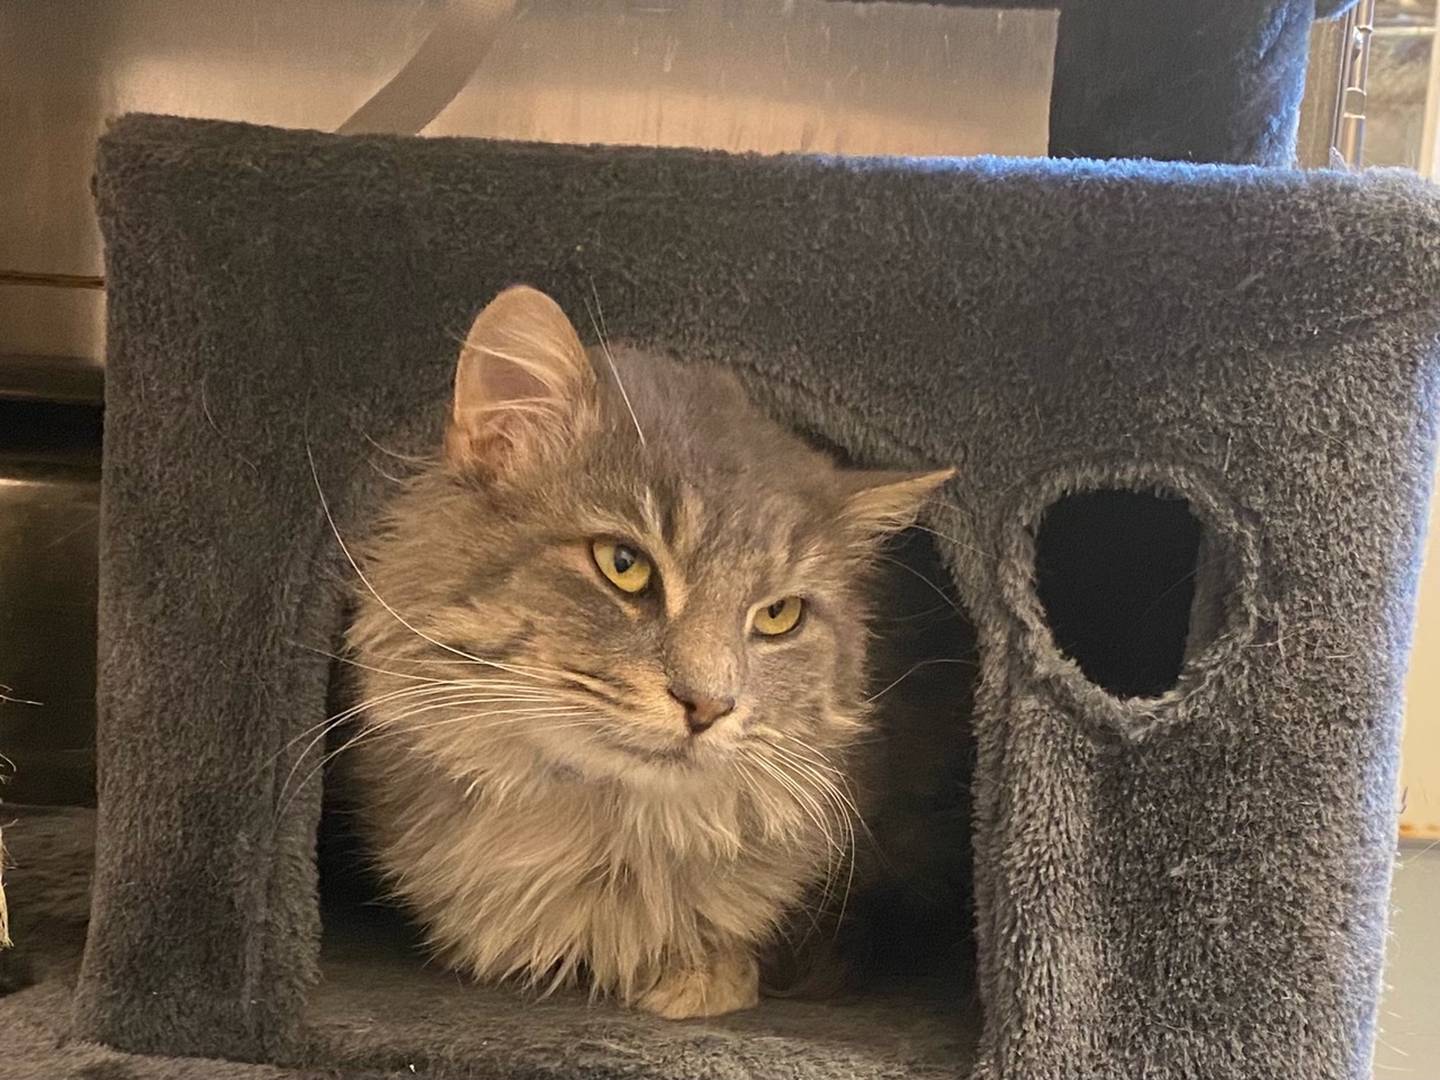 Jason is 1-year-old gray tabby that is friendly, social, and is very affectionate. He is very playful and is good around other cats. Jason is calm and will bring a lot of love into his new home.